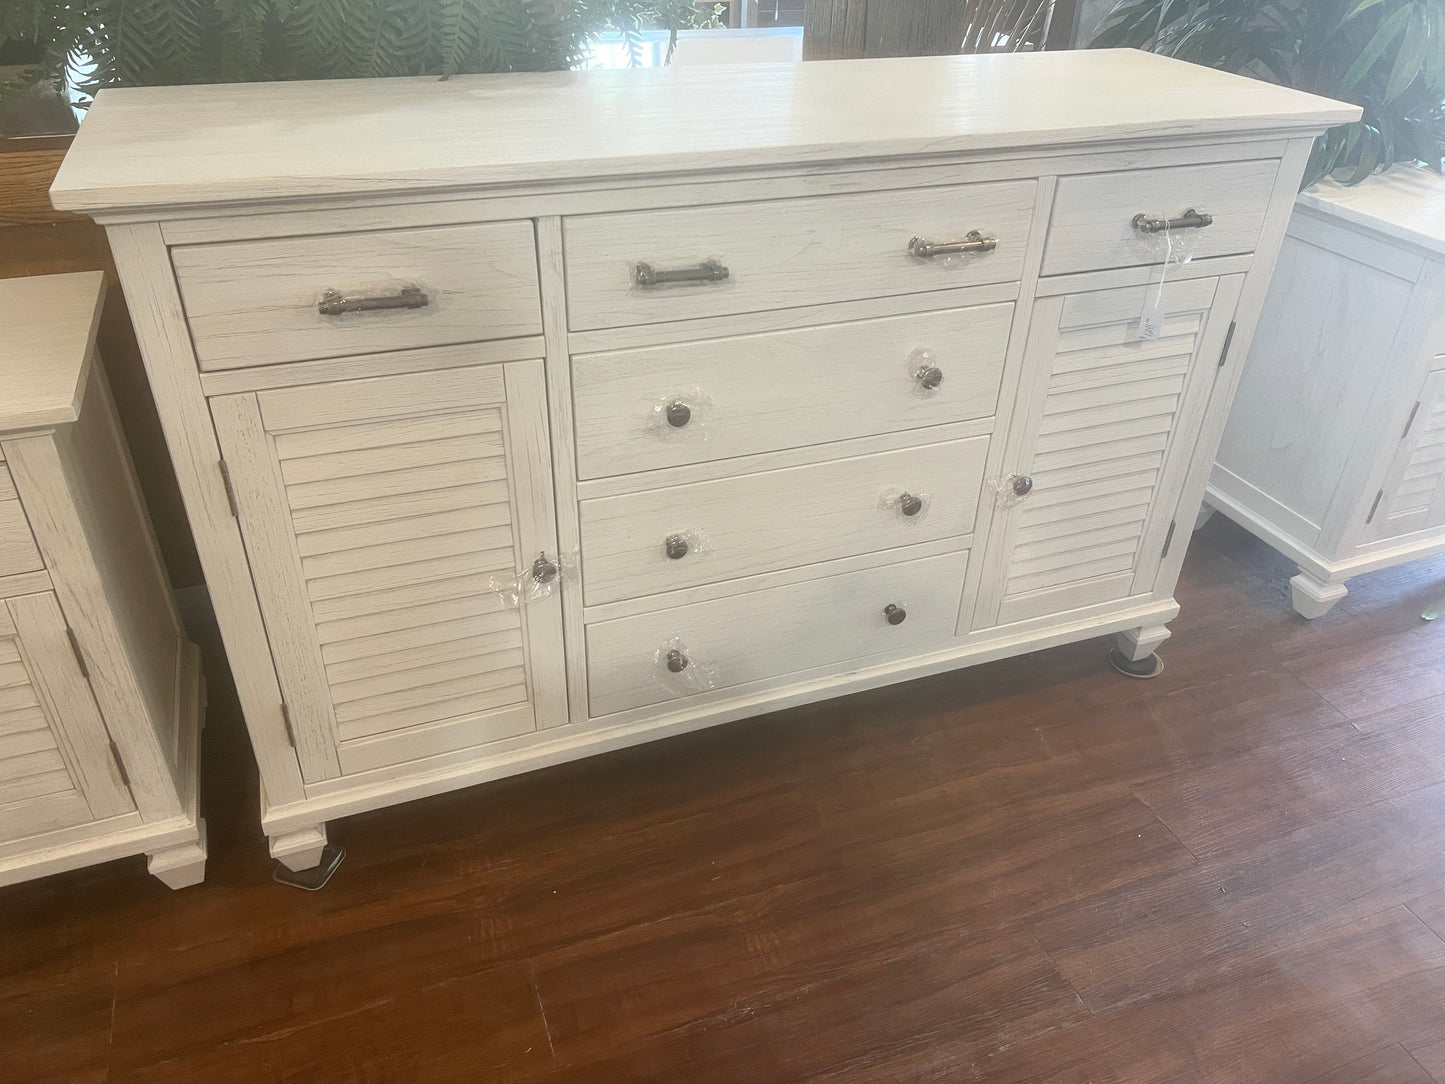 Brand New Sea Winds Surfside Weathered Queen Set Bed Frame White Dresser with two panel door with shevles